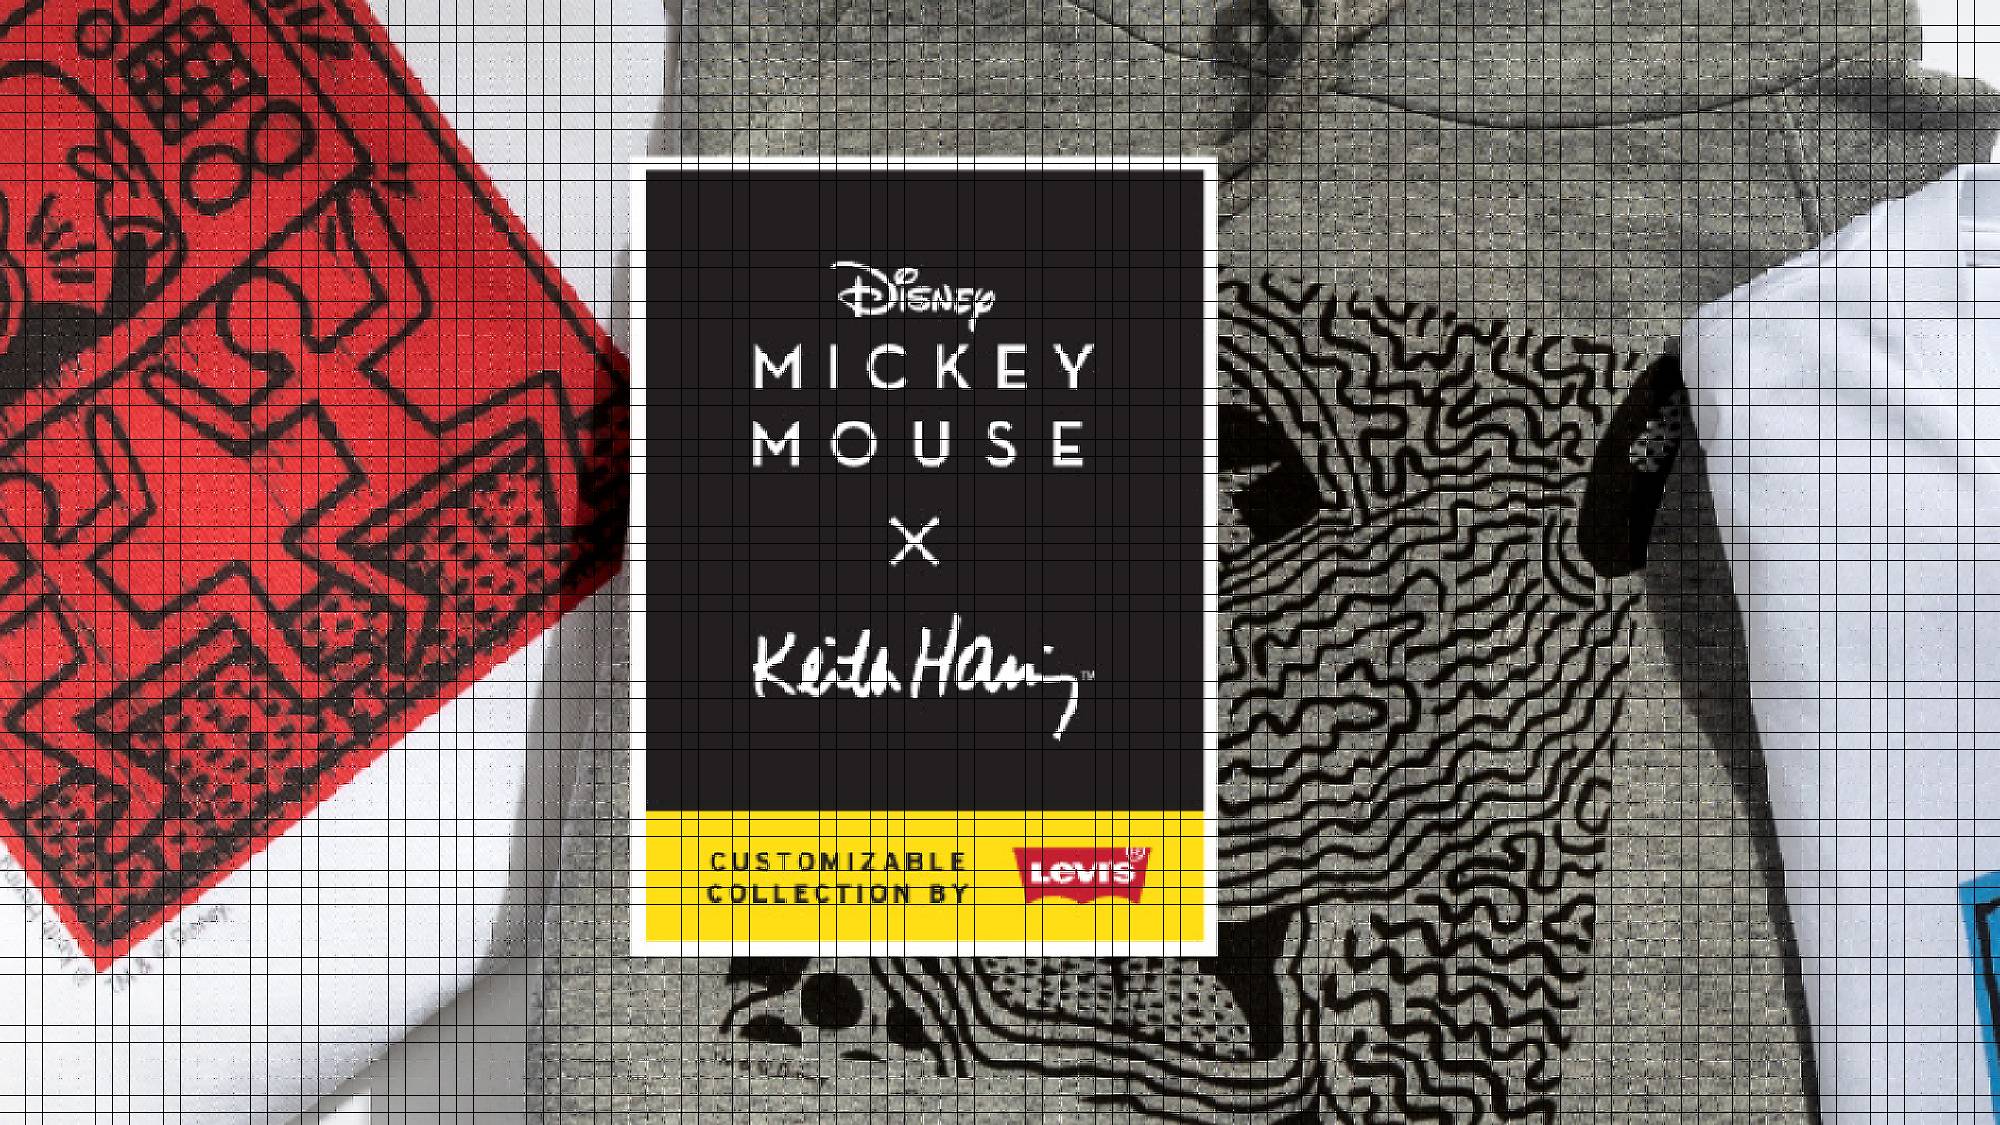 Product from the customizable collaboration by Levi's for Disney Mickey Mouse x Keith Haring